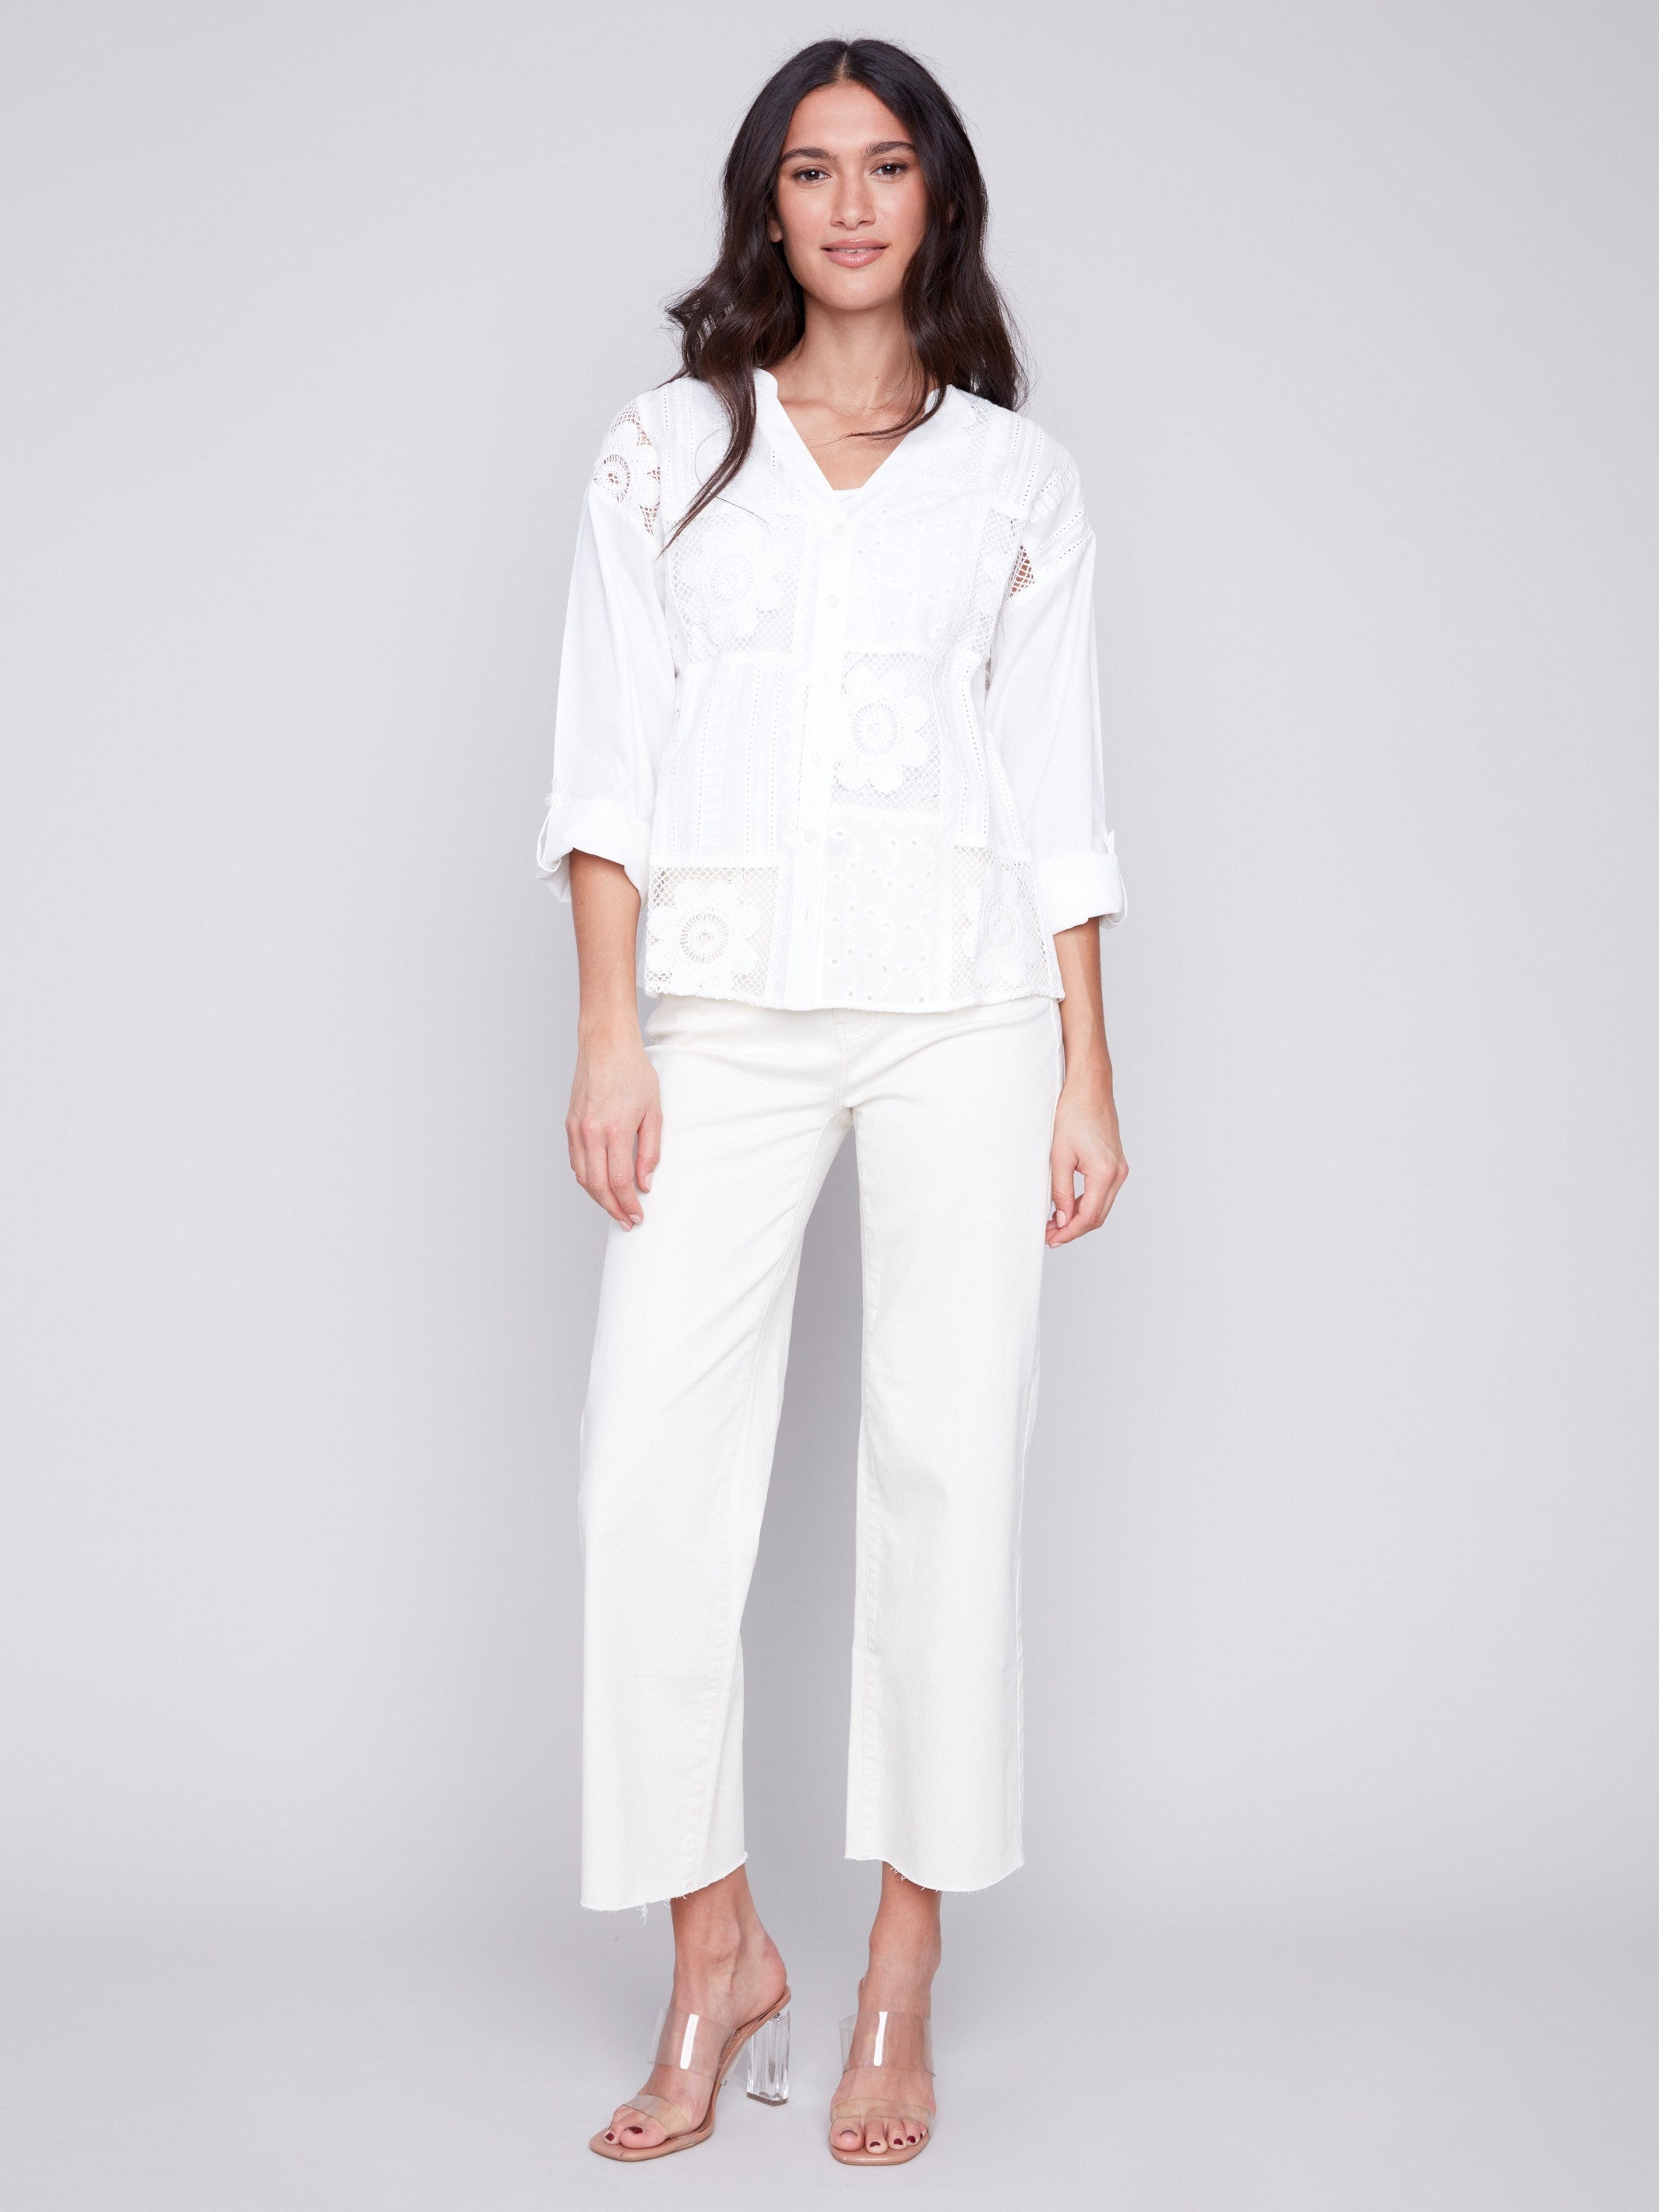 Cotton Eyelet Shirt - White - Charlie B Collection Canada - Image 3